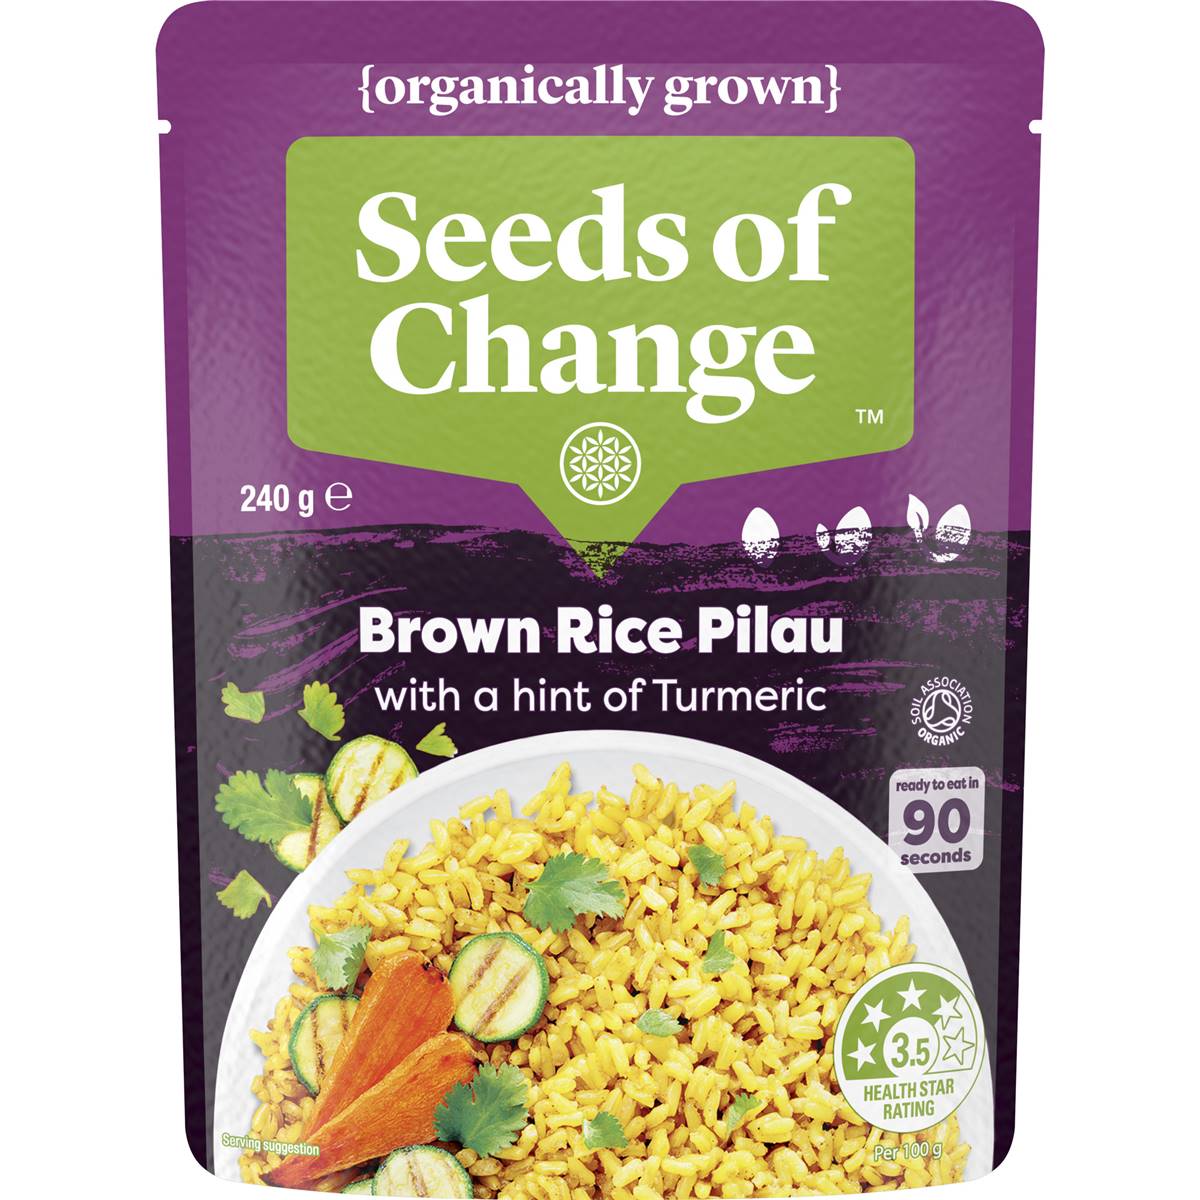 Calories in Seeds Of Change Organic Brown Rice Pilau With Turmeric